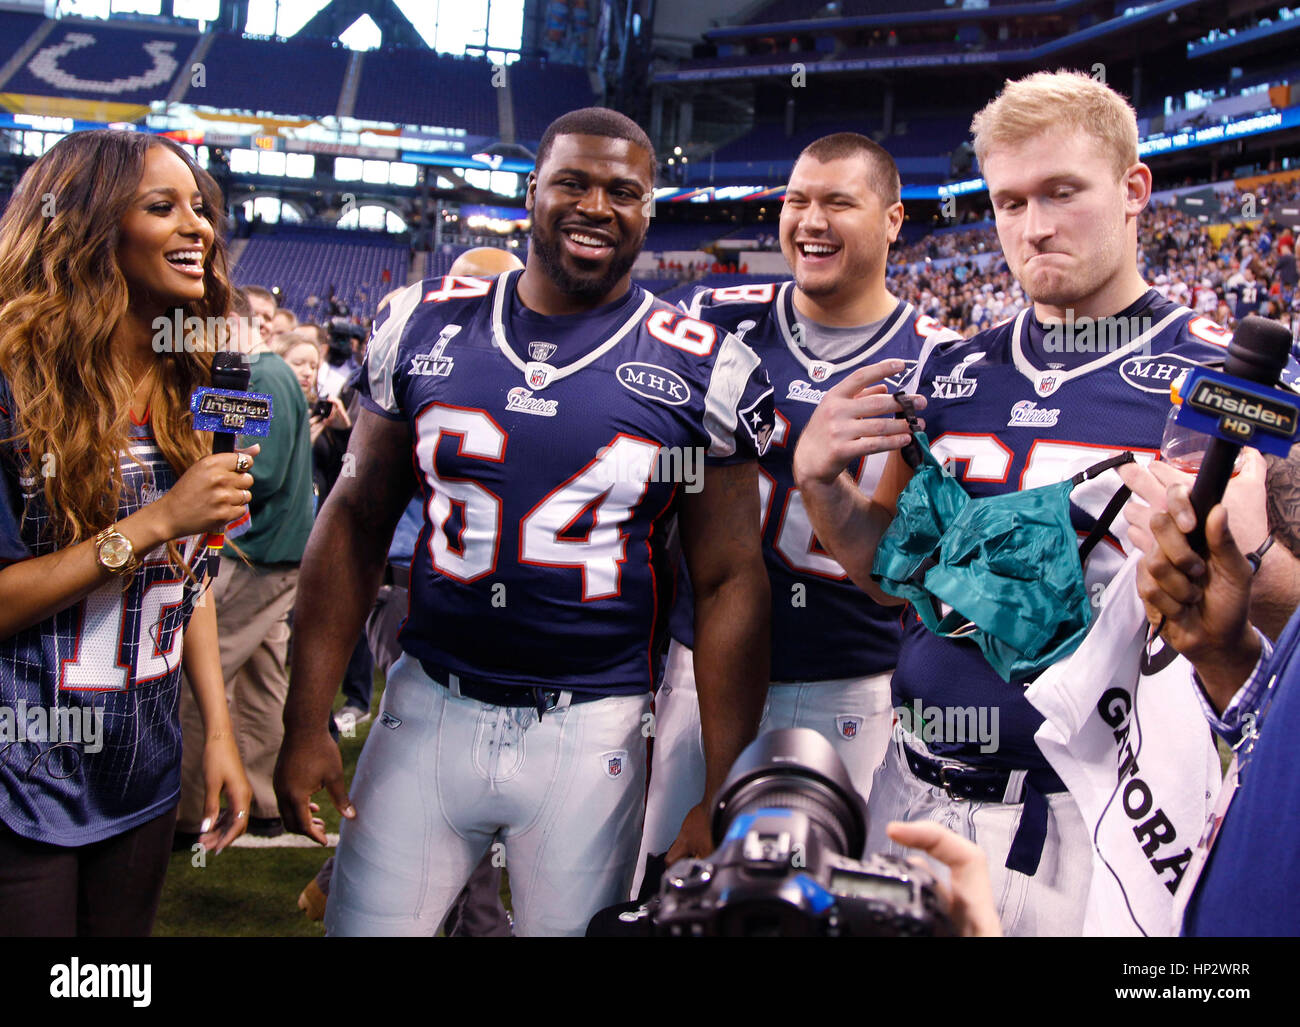 Singer Ciara with New England Patriot players, Donald Thomas (64), Matt Kopa (68) and Nick McDonald (65) who shows off a Madonna bra at the Super Bowl XLVI Media Day in Indianapolis, Indiana on January 31, 2012. Francis Specker Stock Photo